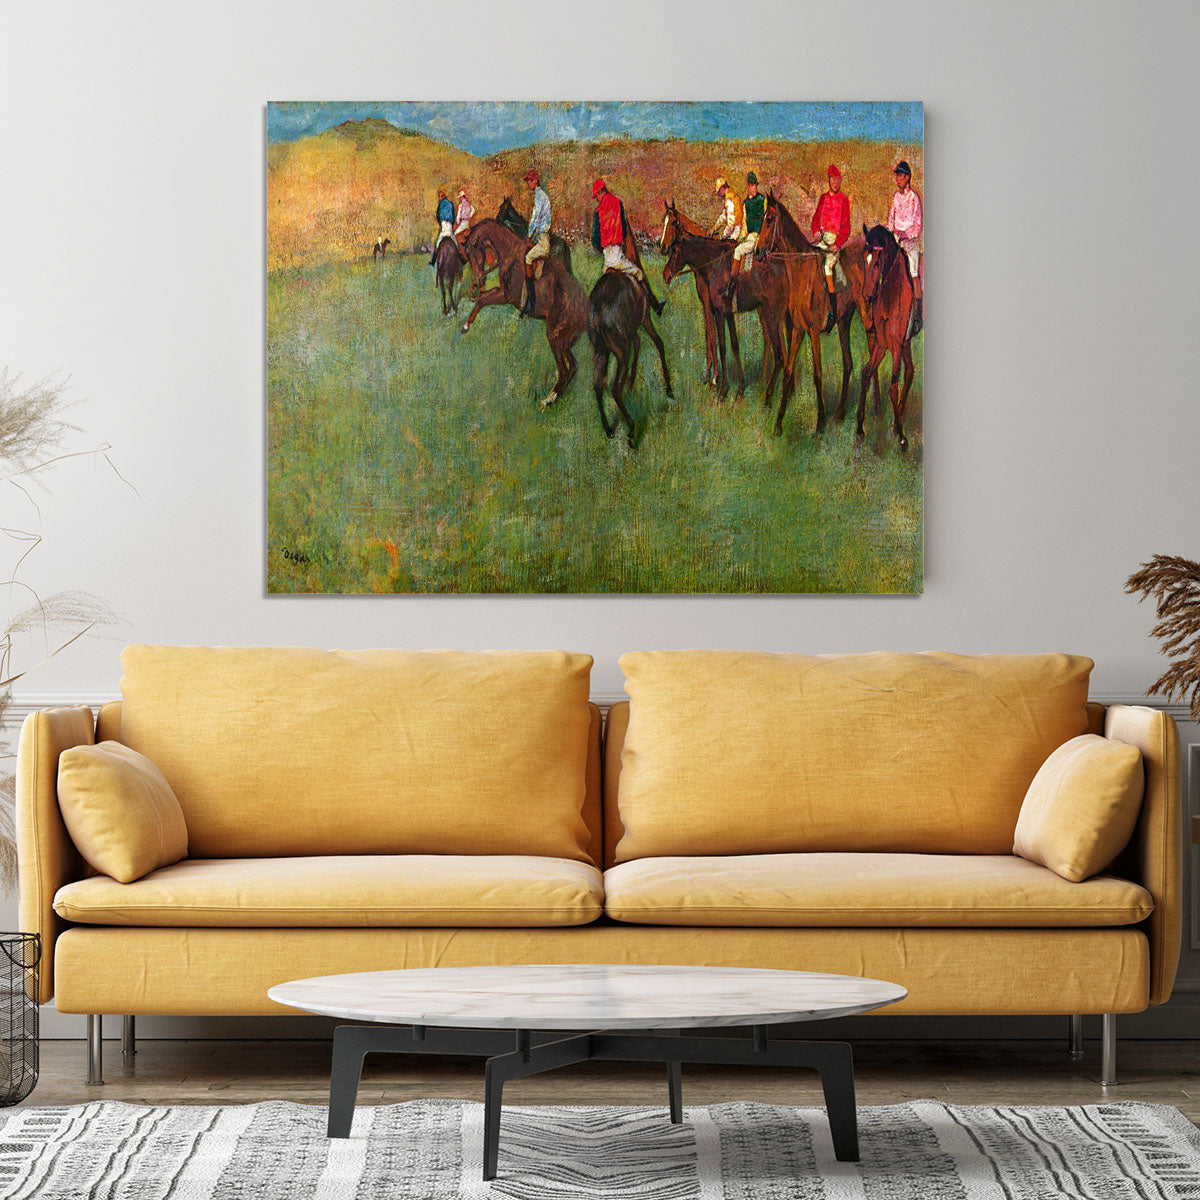 Horse race before the start by Degas Canvas Print or Poster - Canvas Art Rocks - 4